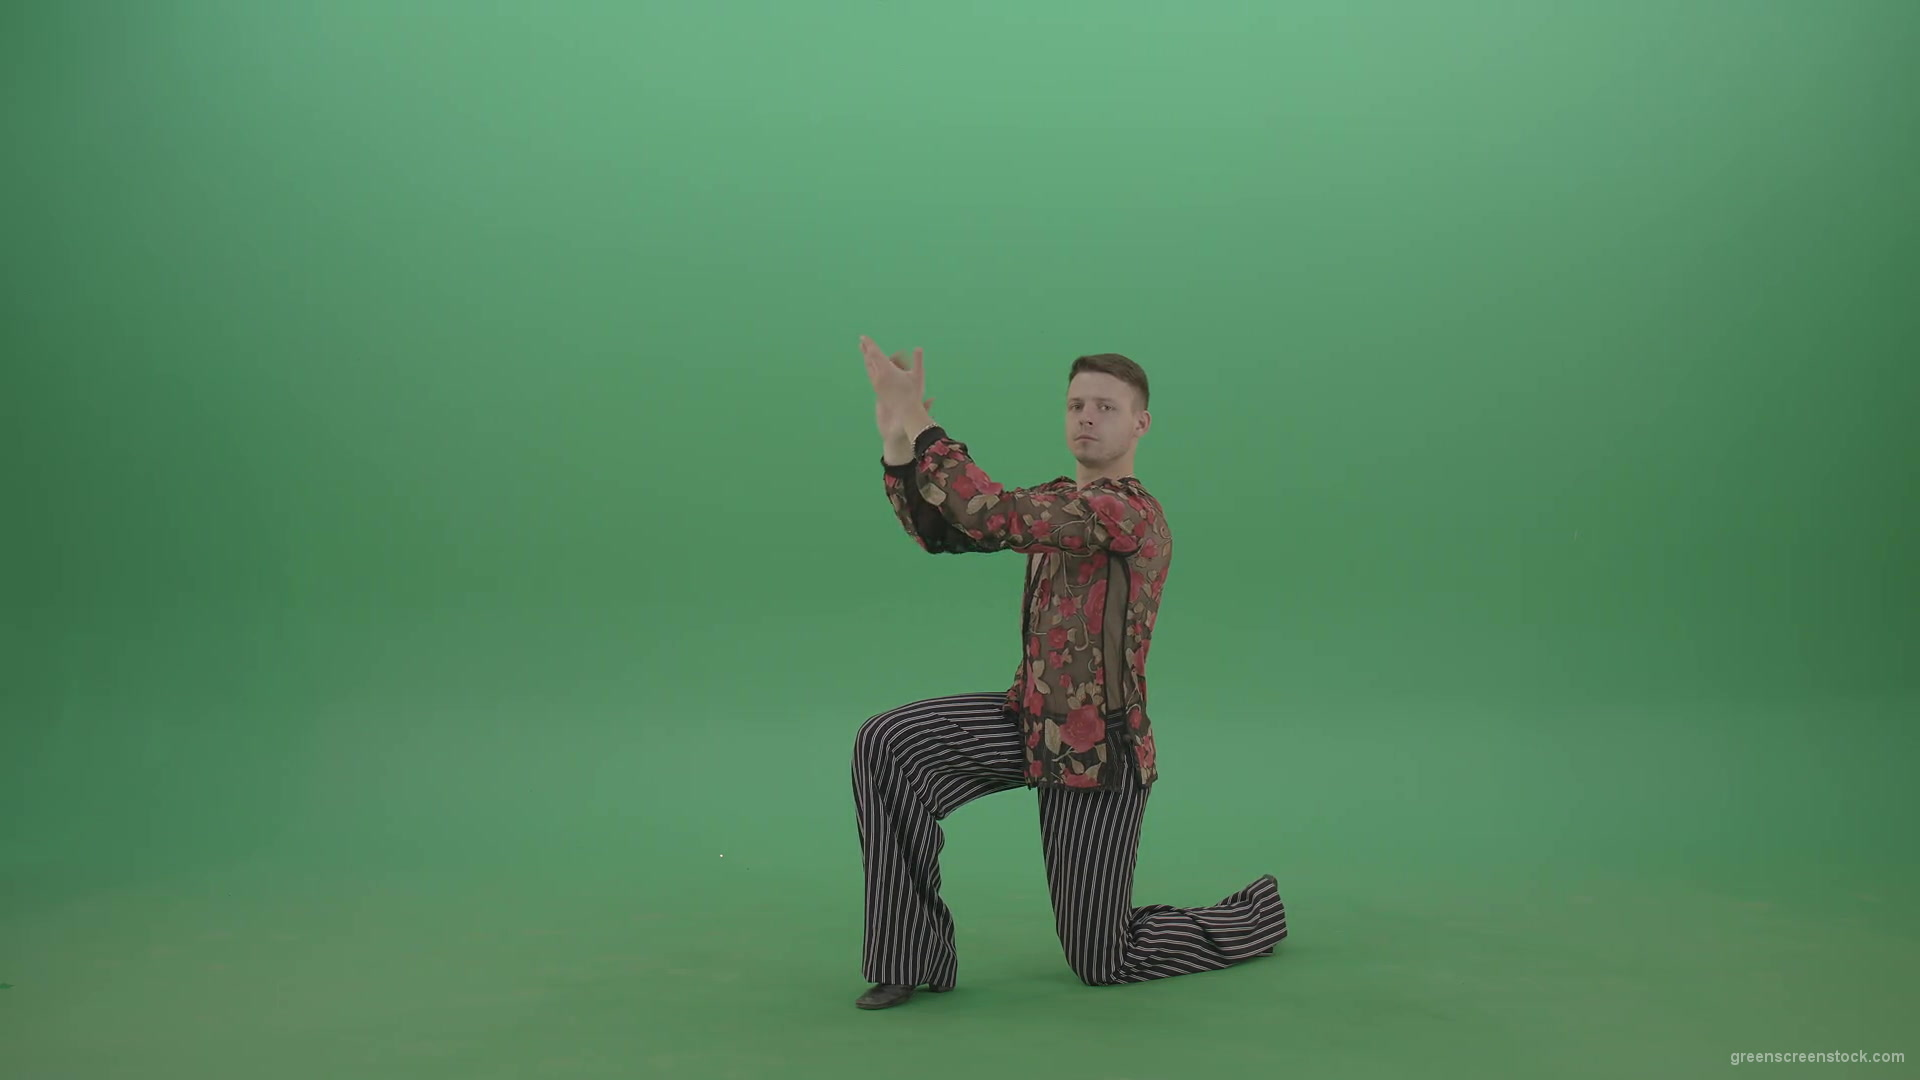 Rumba-Man-get-down-on-one-knees-and-clapping-in-hands-over-green-screen-4K-Video-Footage--1920_007 Green Screen Stock